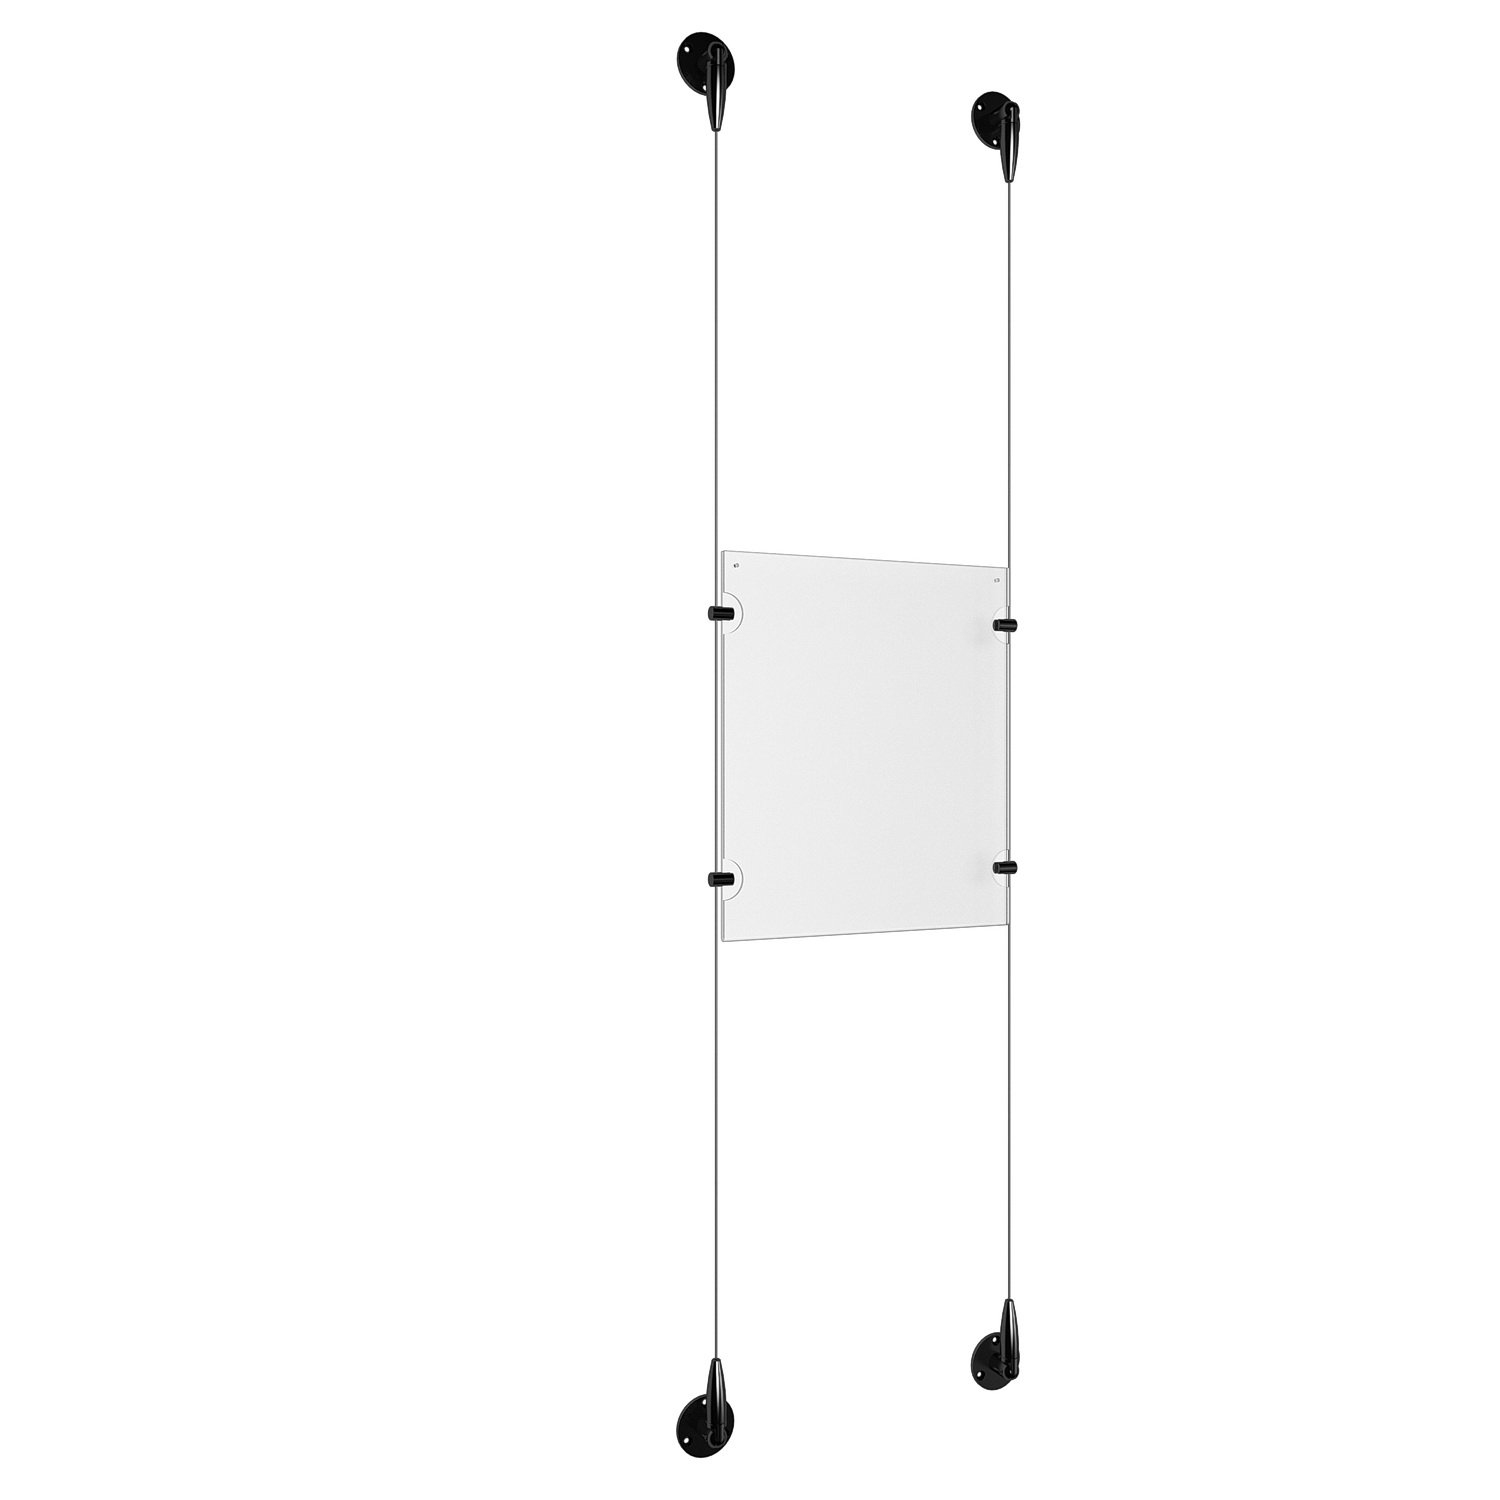 (1) 8-1/2'' Width x 11'' Height Clear Acrylic Frame & (2) Aluminum Matte Black Adjustable Angle Signature 1/8'' Diameter Cable Systems with (4) Single-Sided Panel Grippers